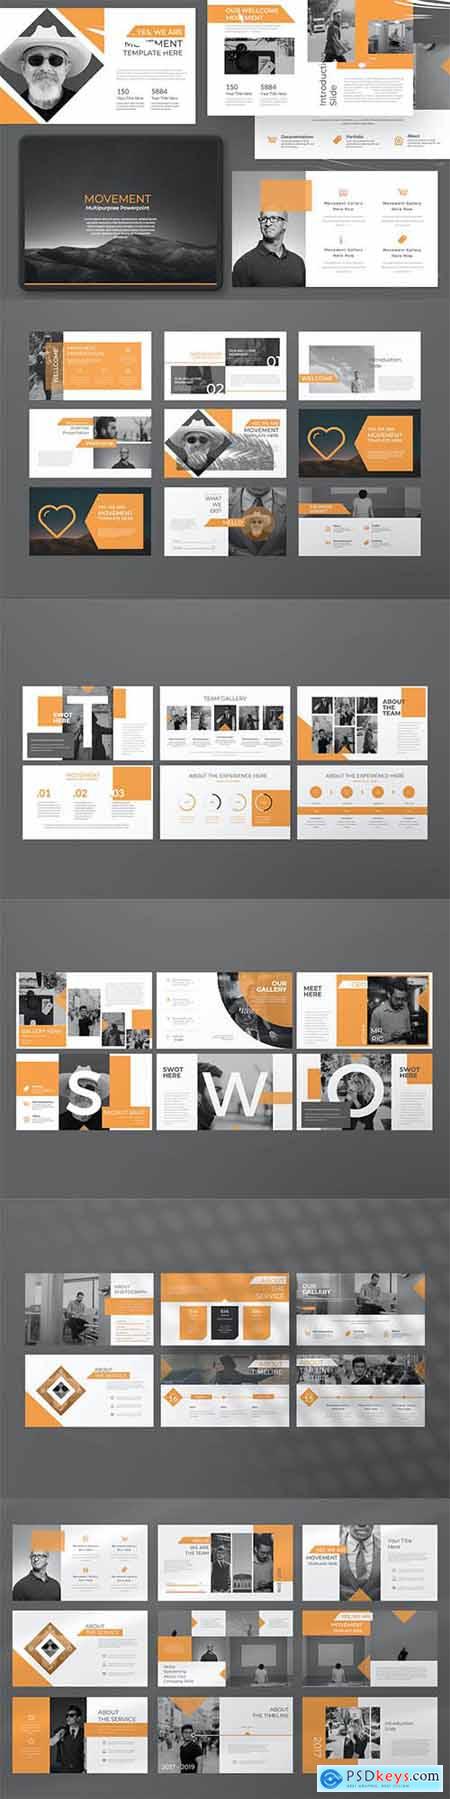 business pitch keynote template by creative slides